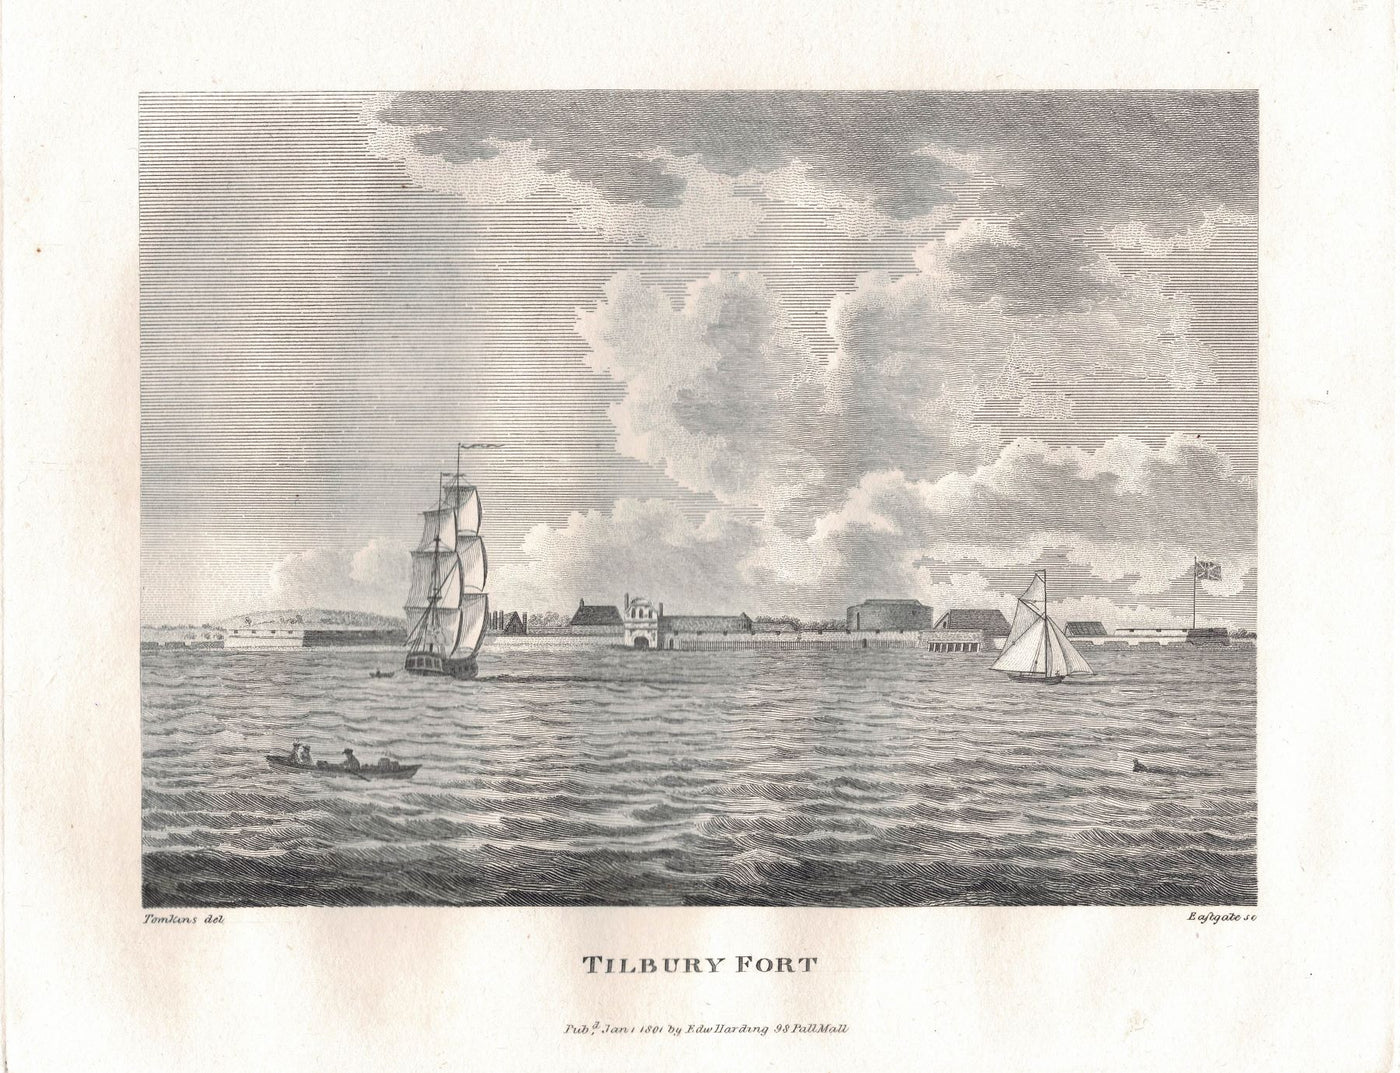 Tilbury Fort from the River Thames antique print published in 1801